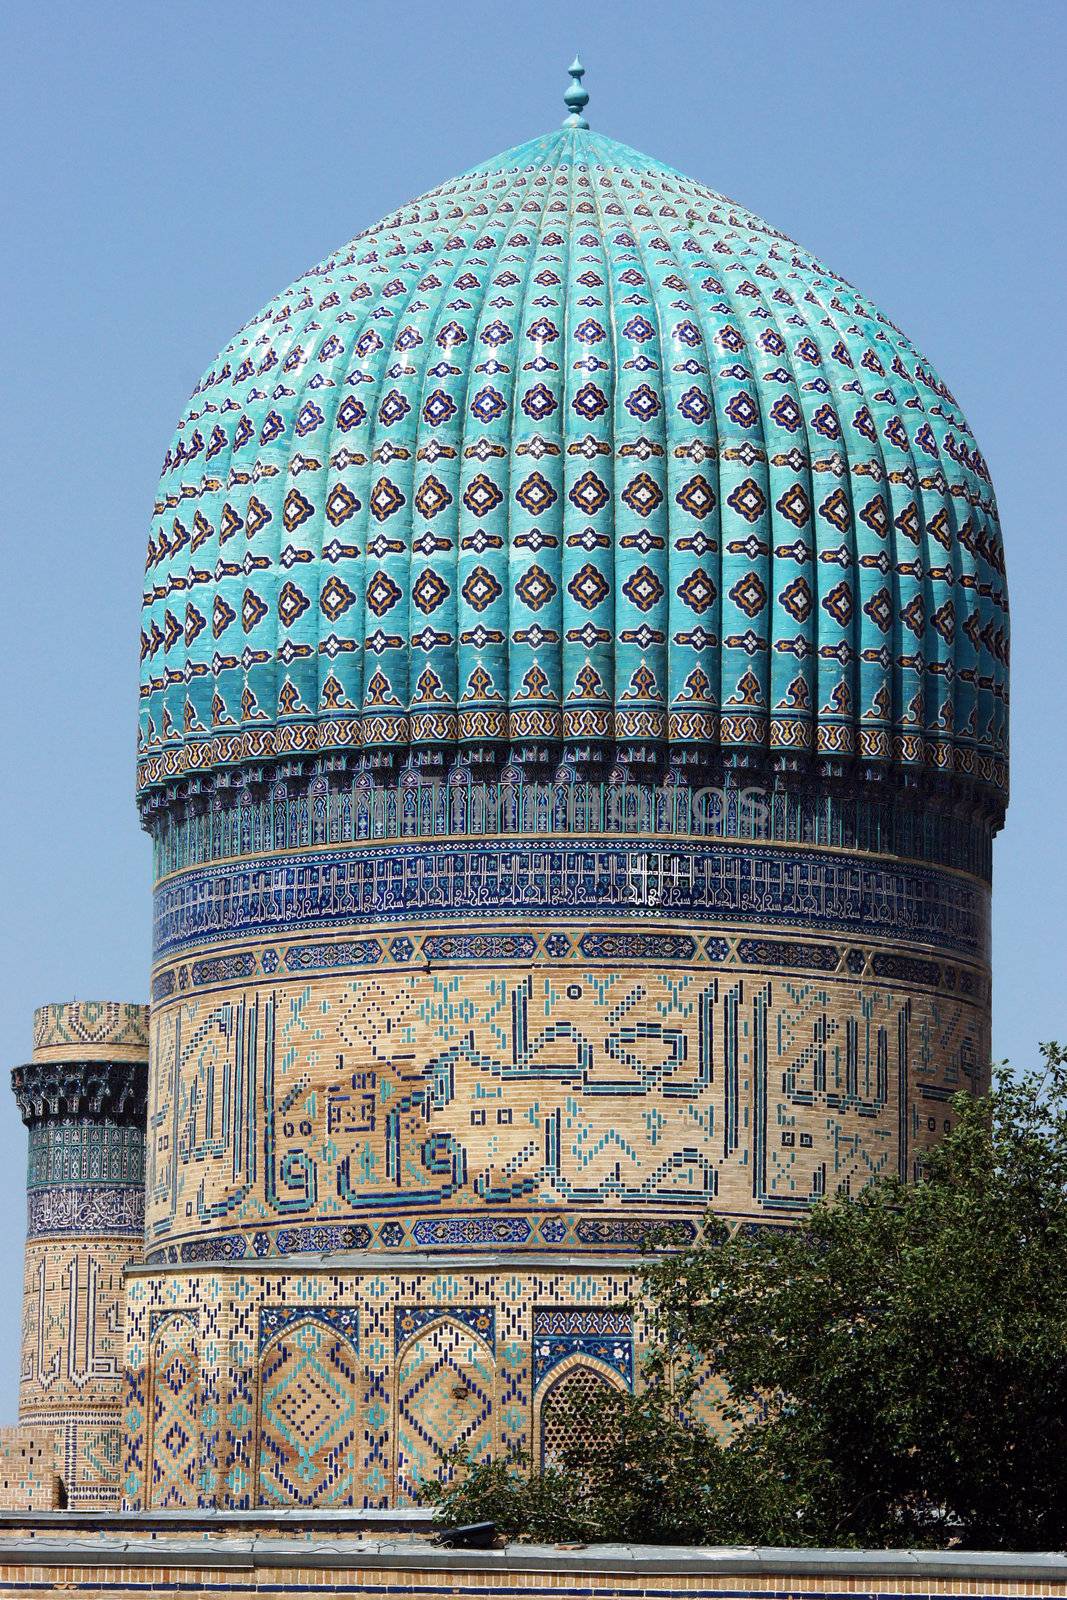 Mosque Bibi Xanom, one of the attractions of Samarkand, silk road, Uzbekistan, Central Asia